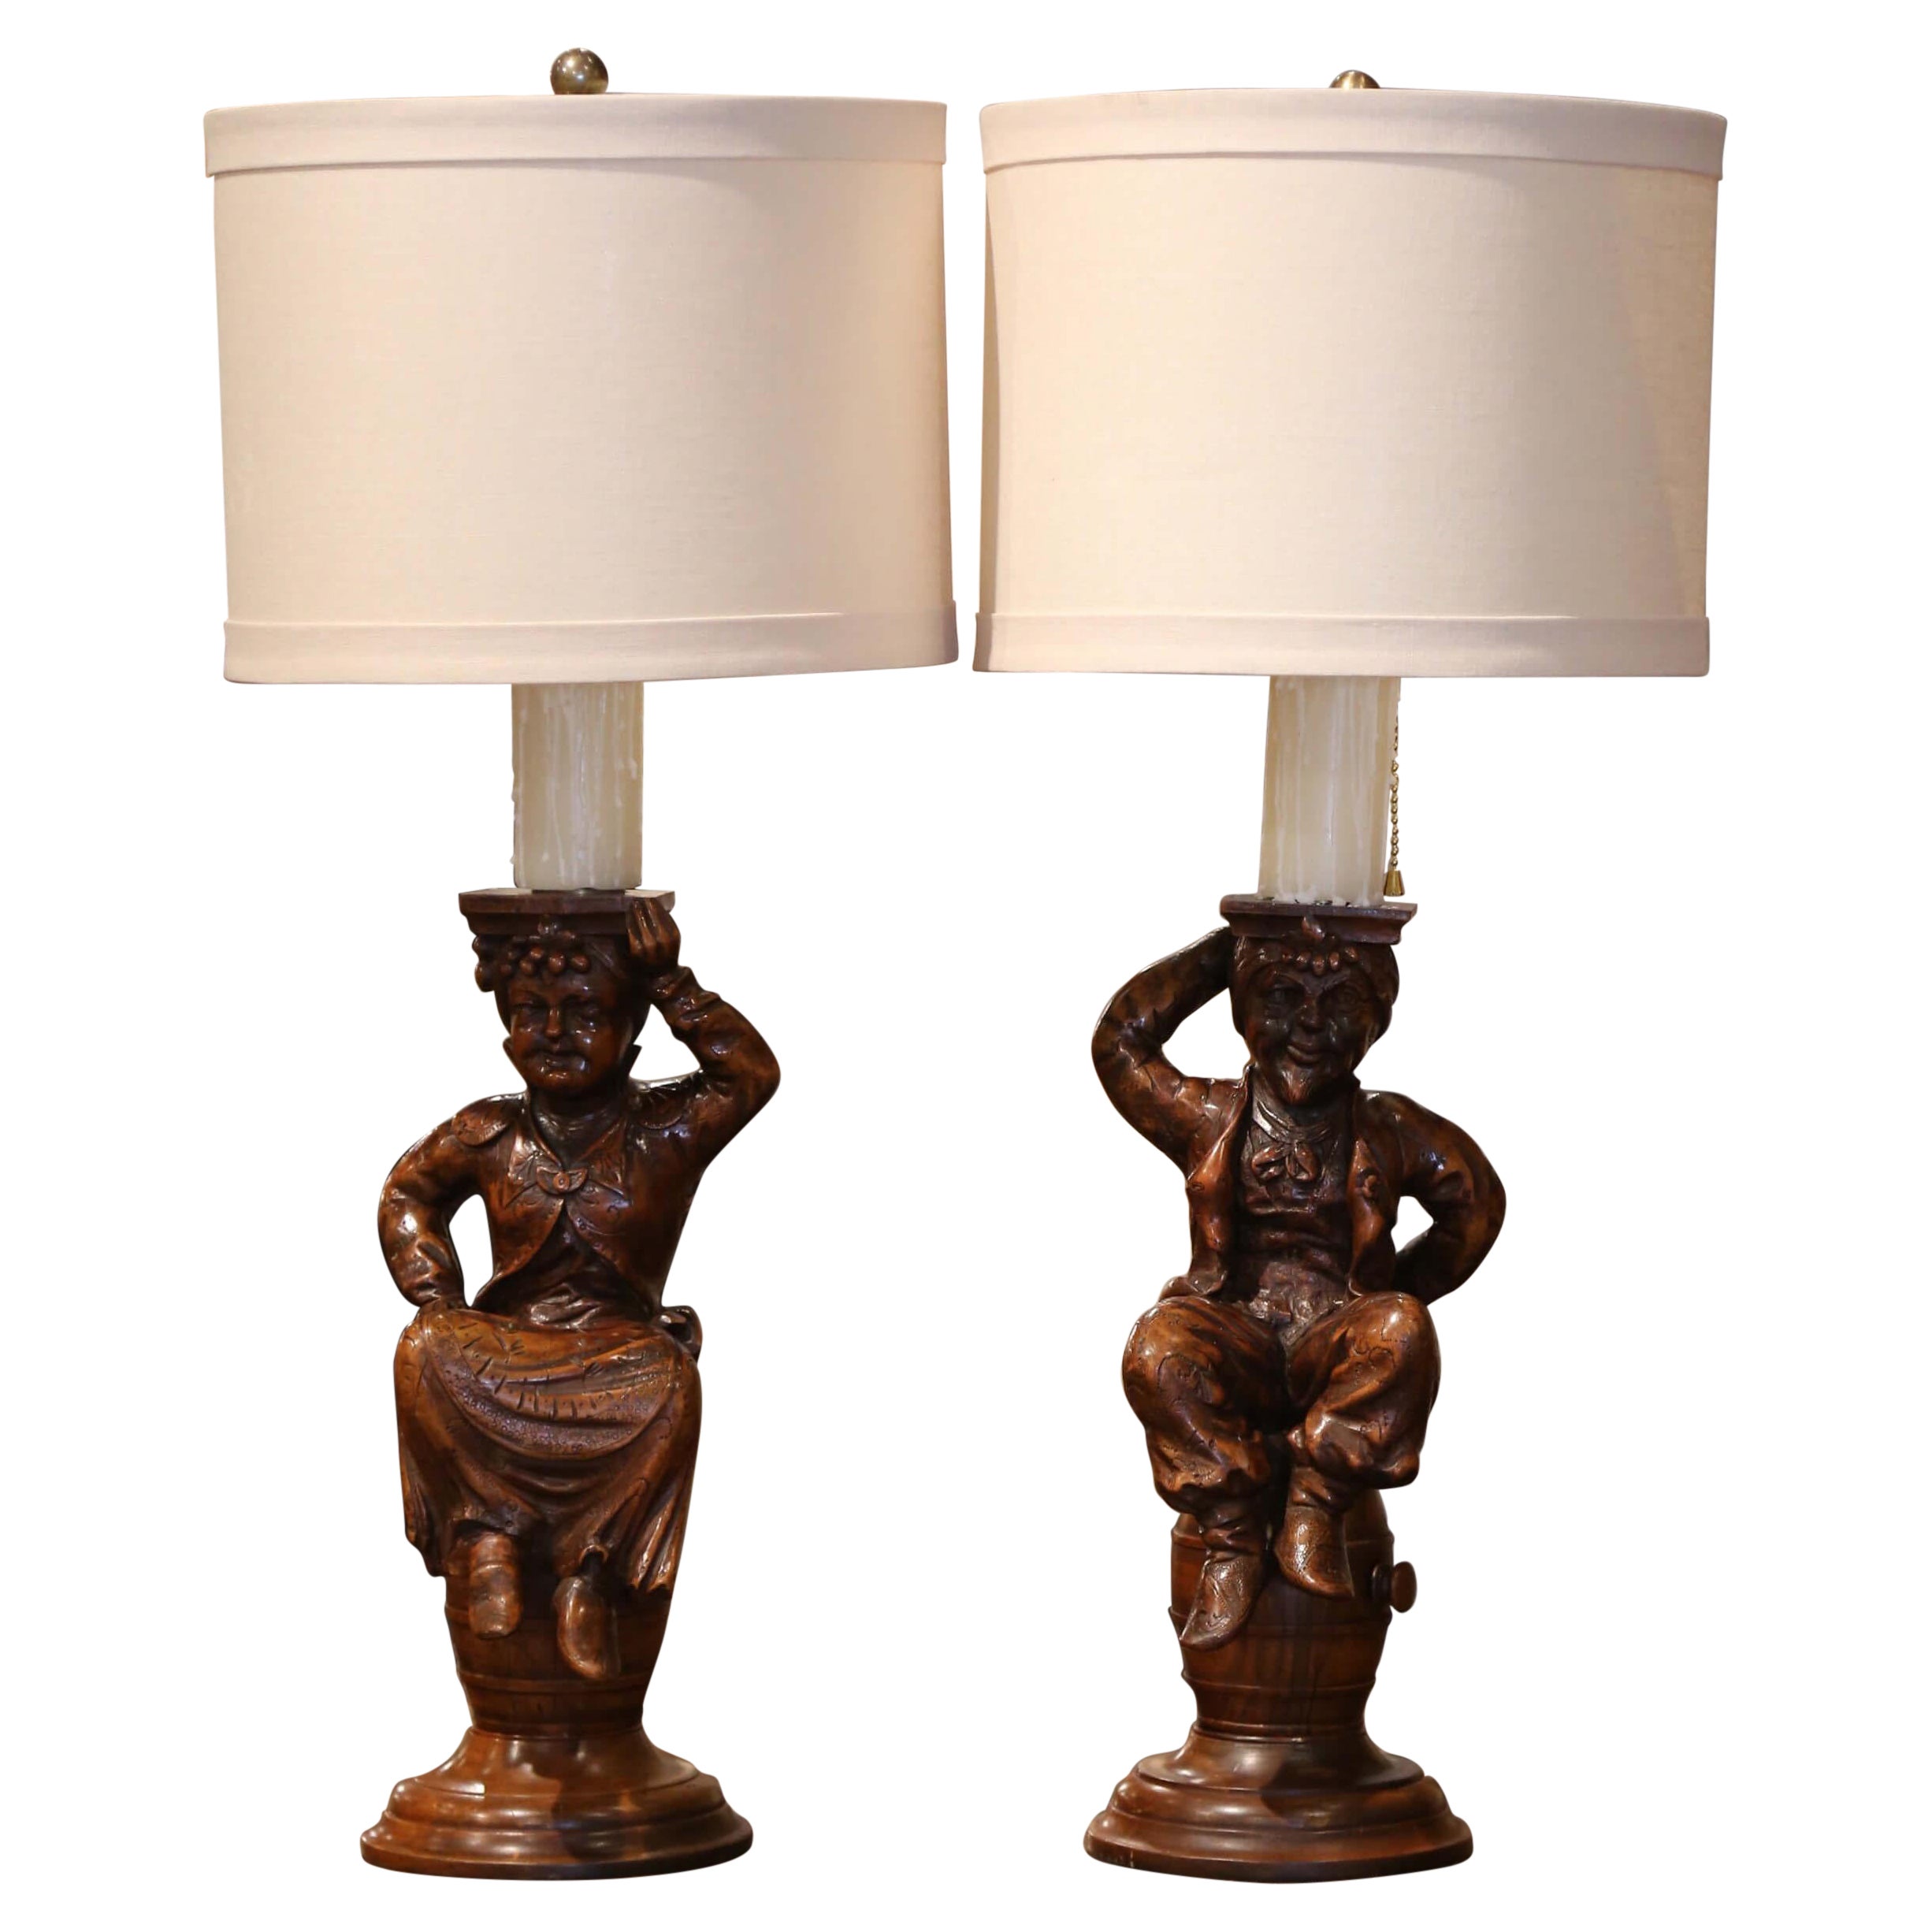 Pair of 19th Century French Carved Walnut "Cabaret Figures" Lamp Bases For Sale